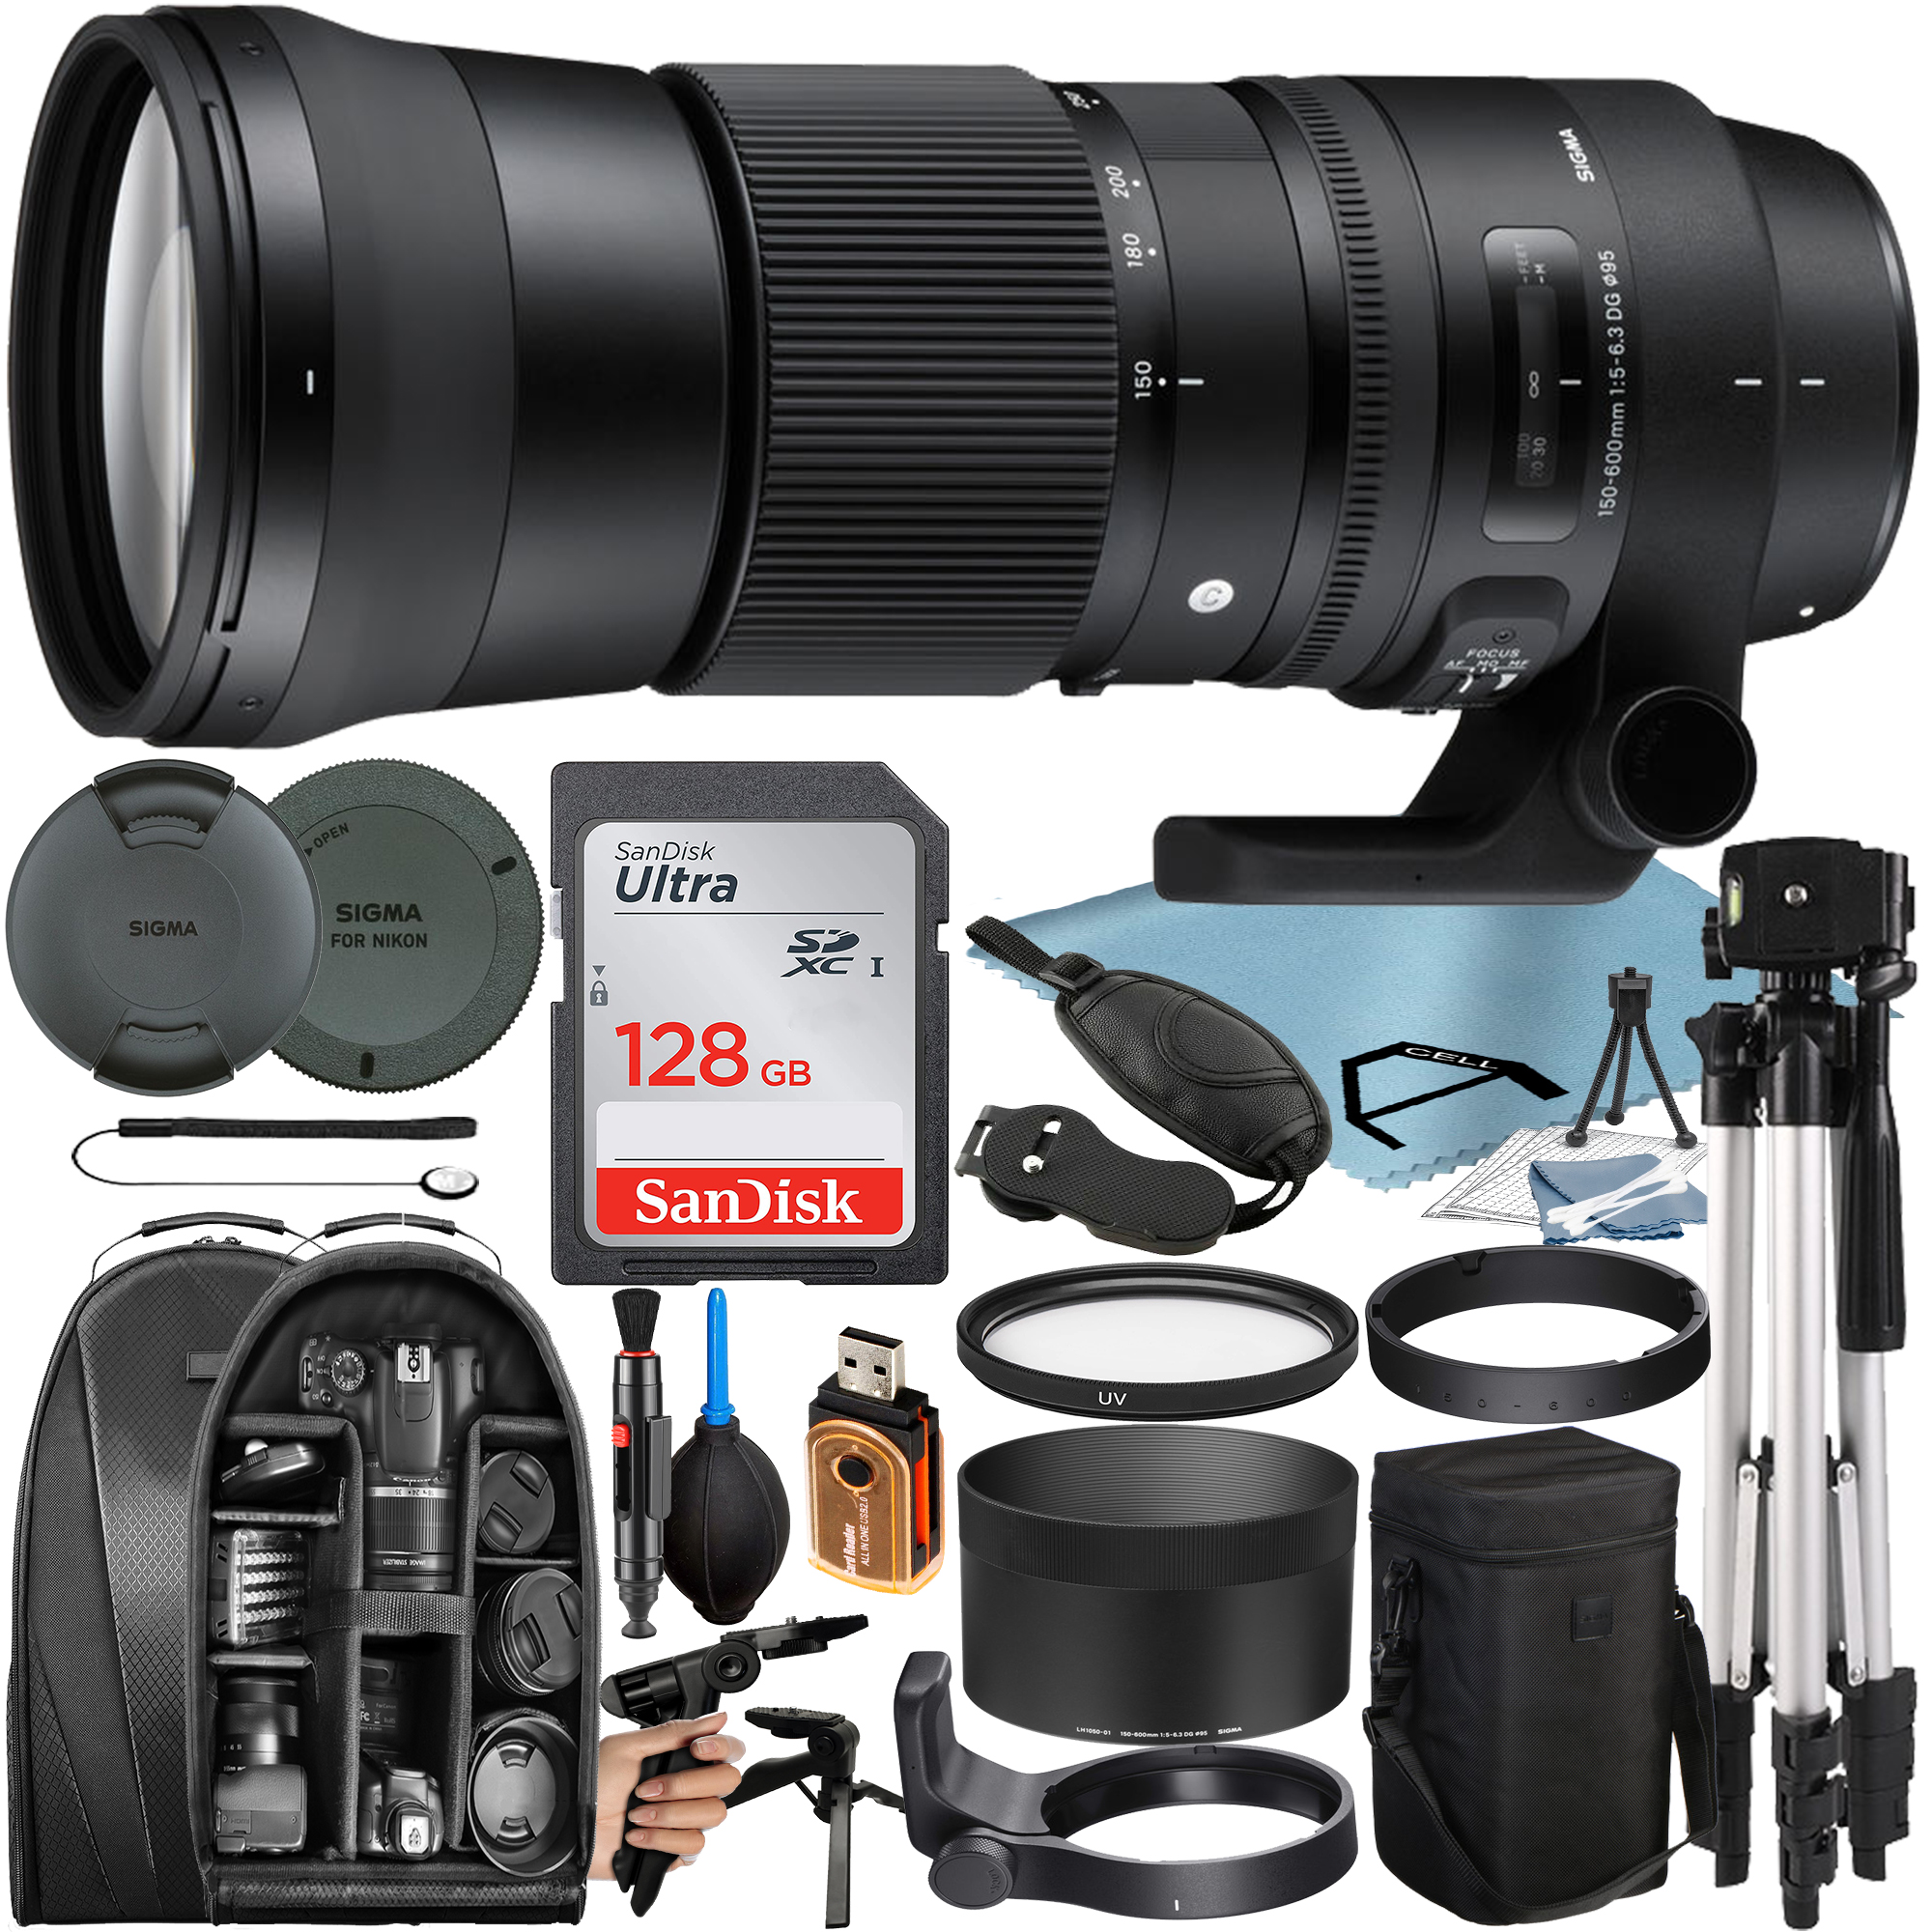 Sigma 150-600mm F/5-6.3 DG OS HSM Contemporary Lens for Nikon F with 128GB SanDisk Memory Card + Tripod + Backpack + A-Cell Accessory Bundle